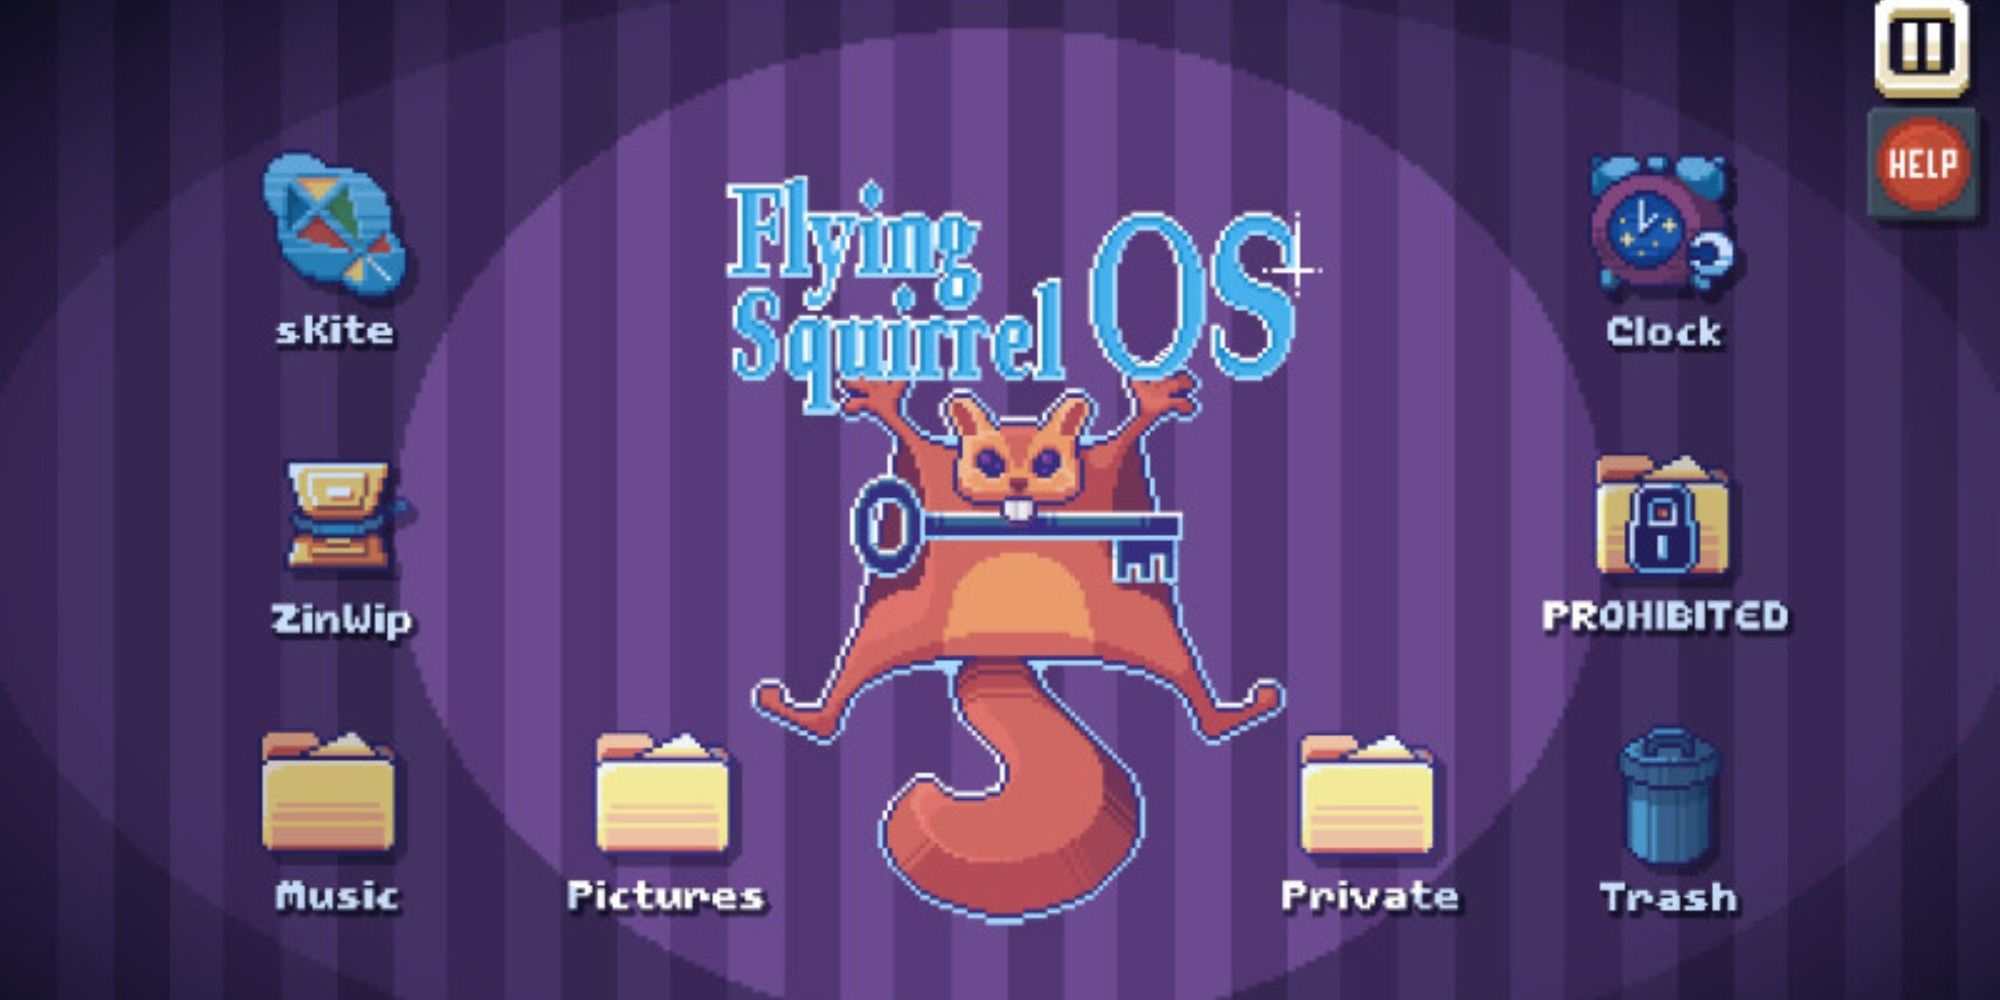 There Is No Game Wrong Dimension Squirrel OS computer screen